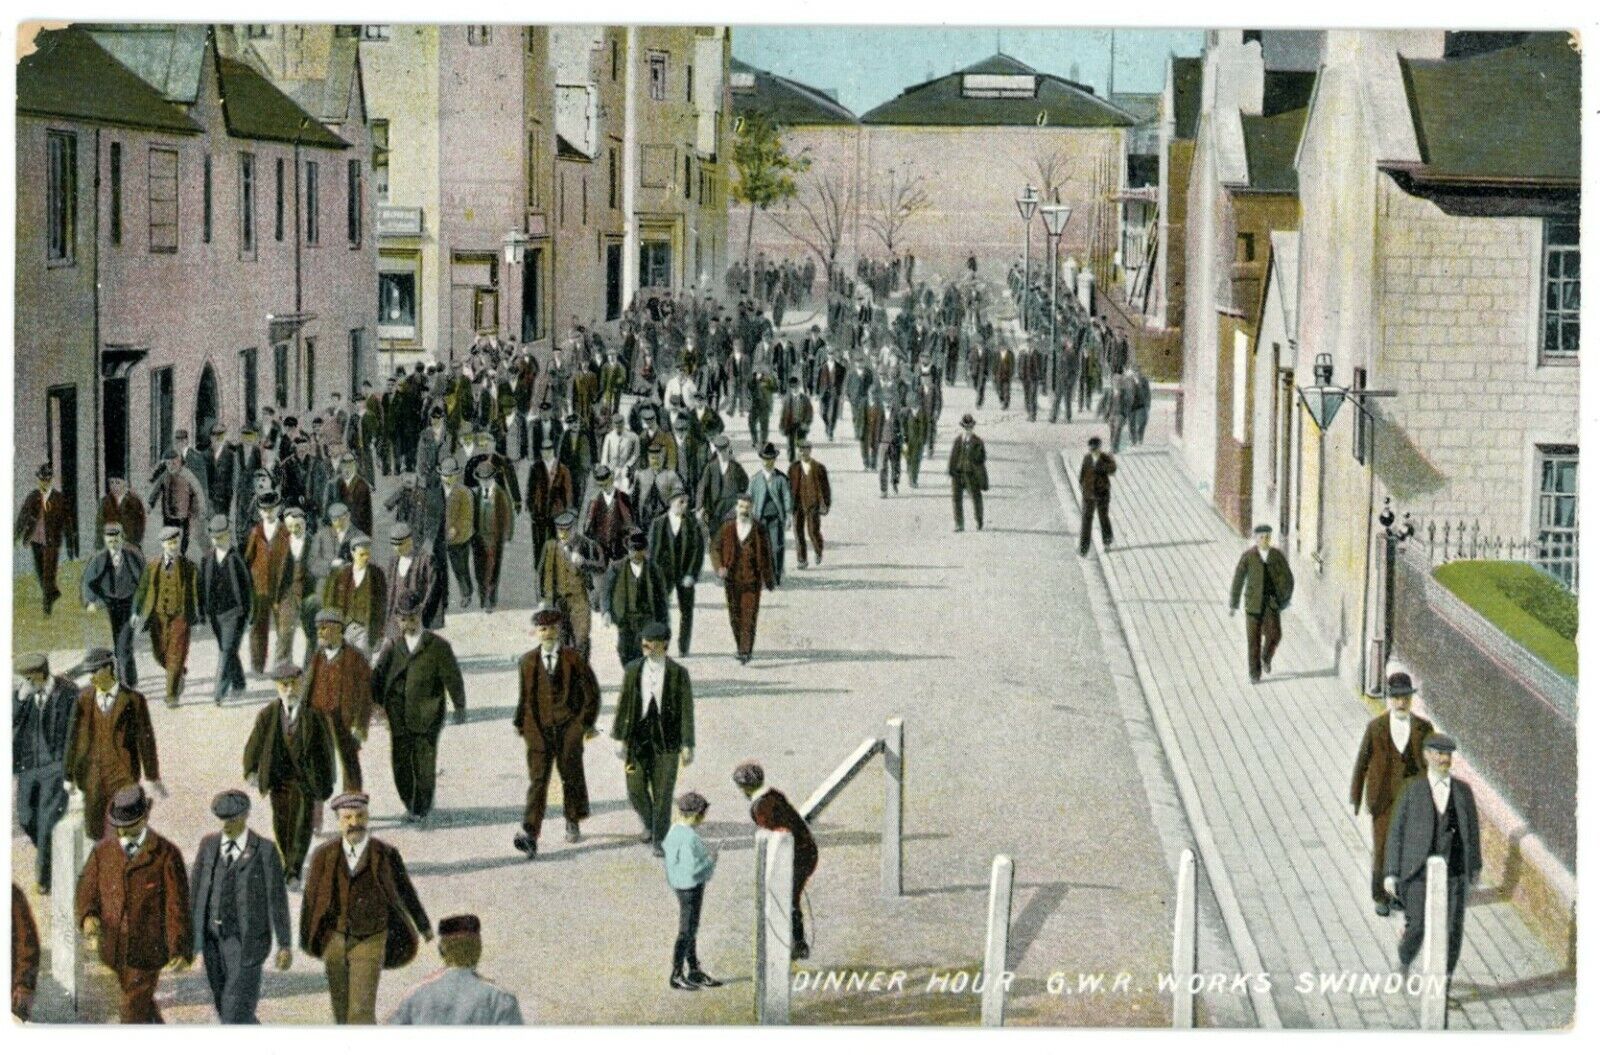 Crowd Of Men Going Out For Dinner Hour GWR Works Swindon Wiltshire UK Postcard